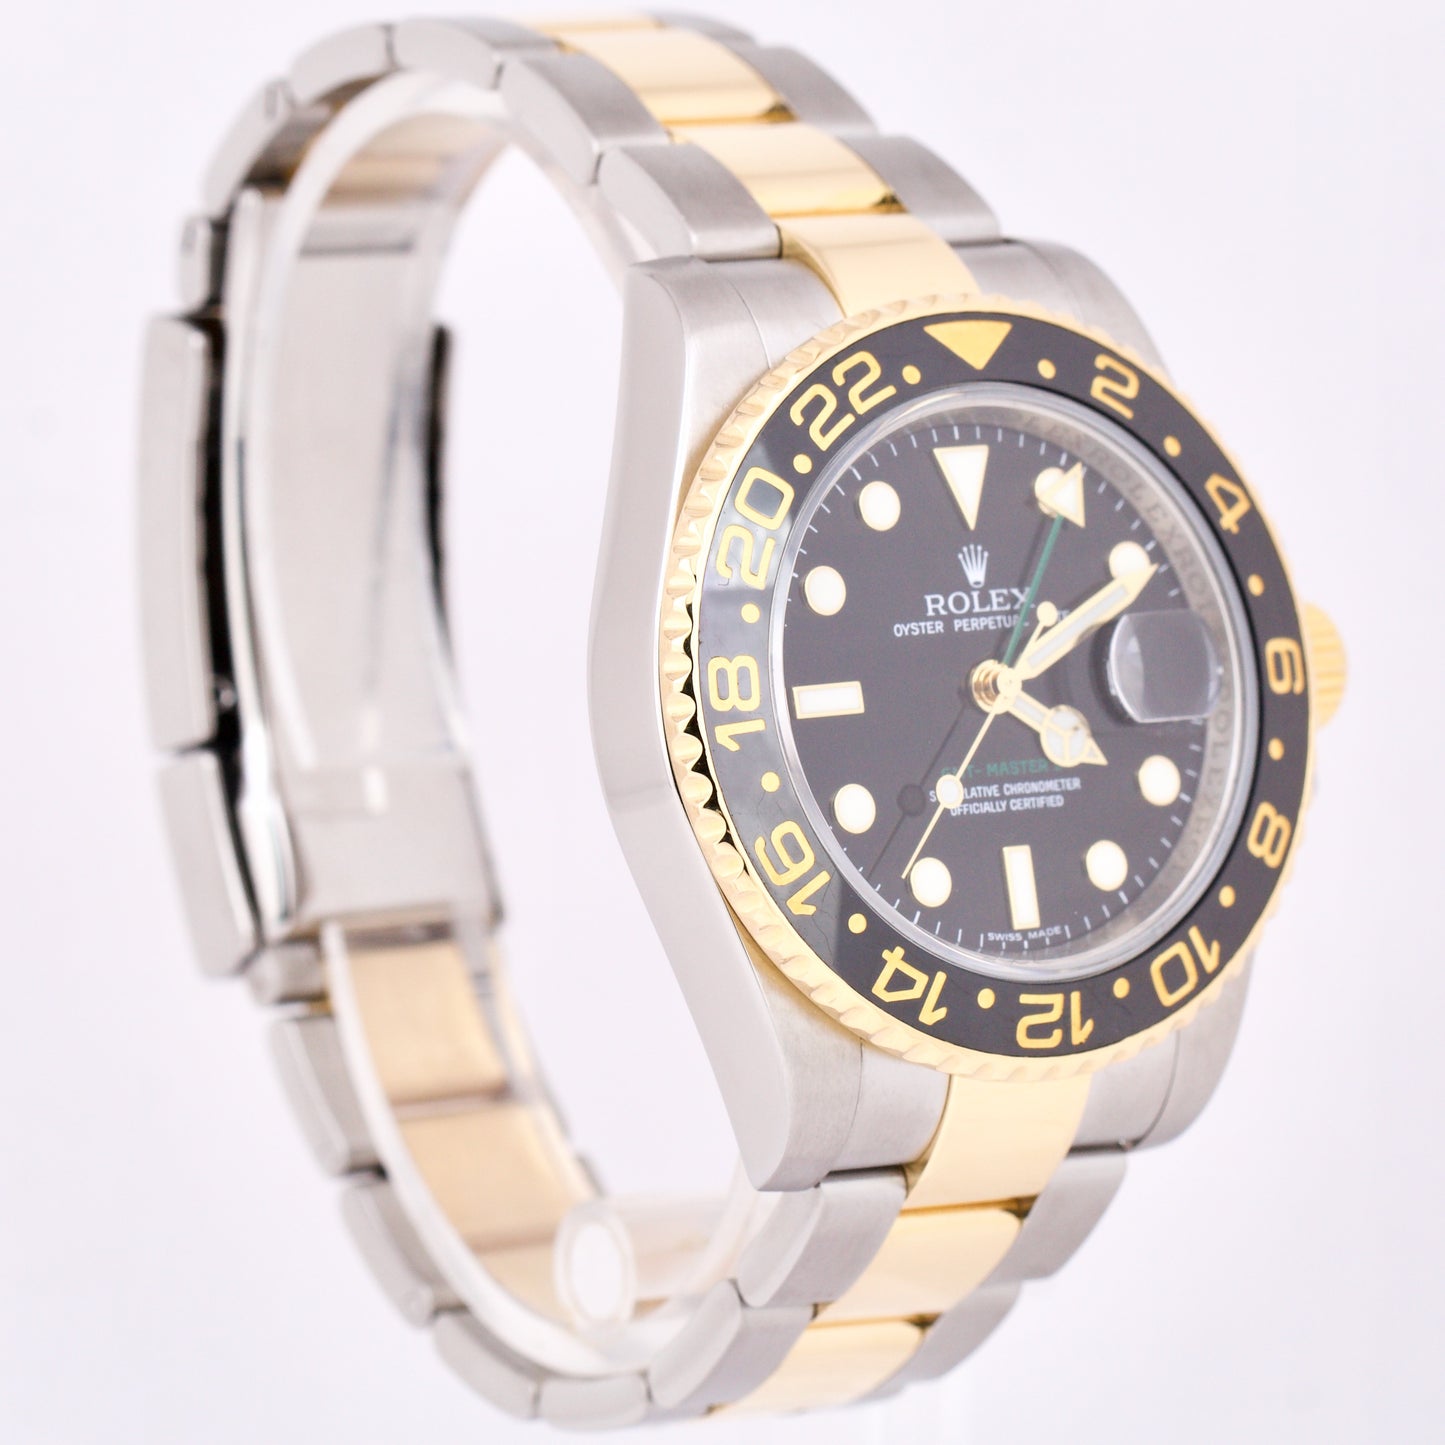 Rolex GMT-Master II 116713 Black Ceramic Two-Tone 18K Yellow Gold Stainless 40mm